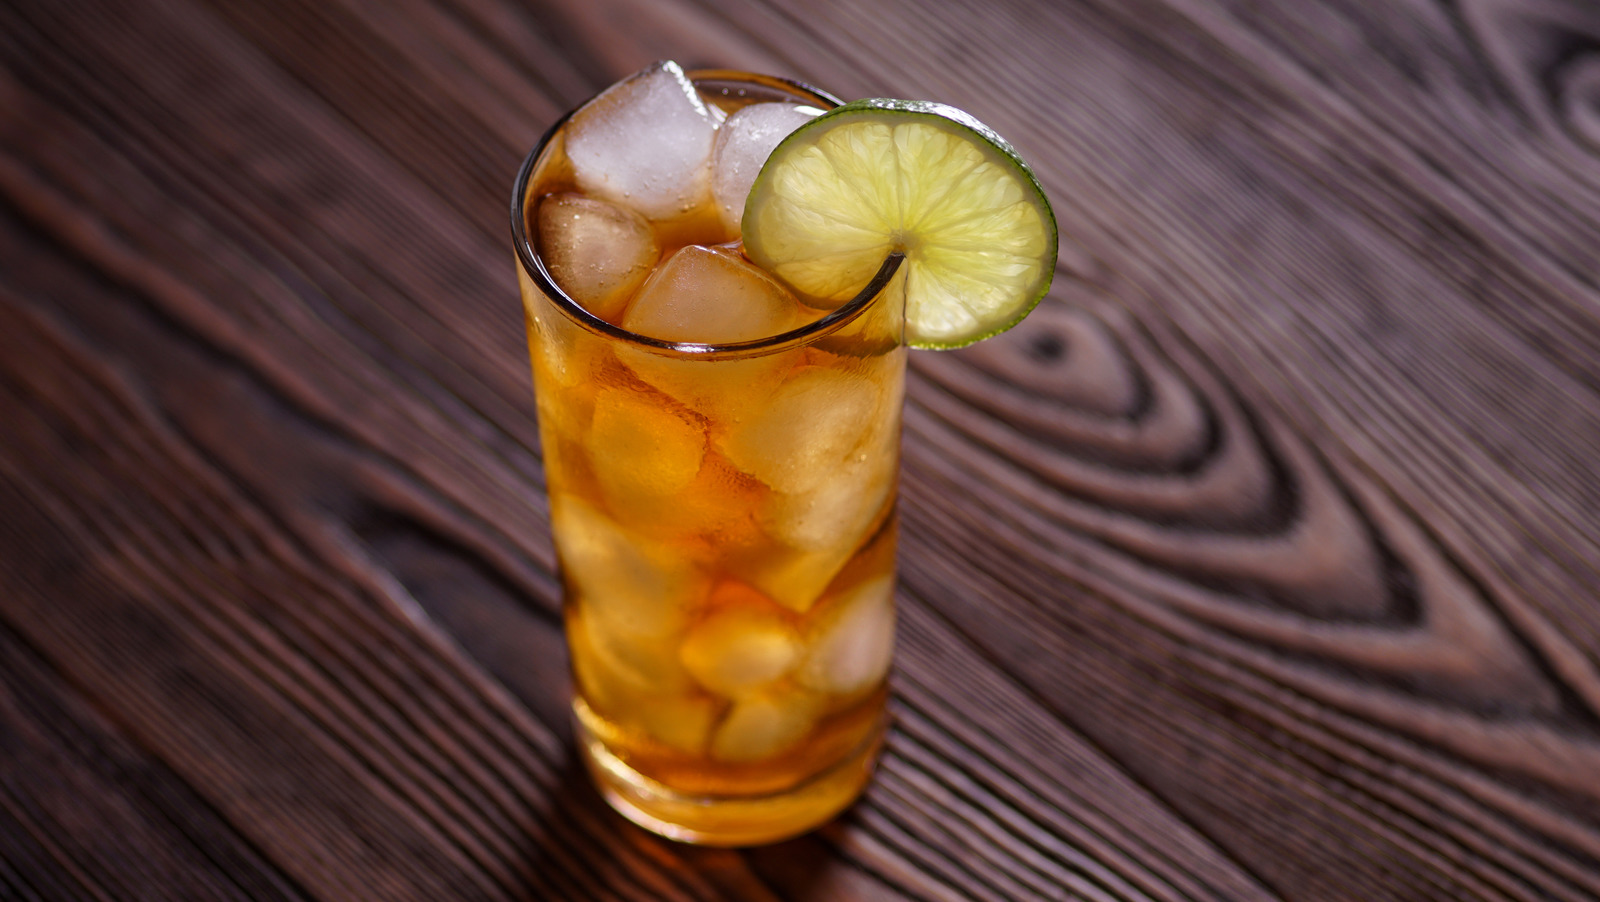 The Reason You Should Think Twice About Drinking Long Island Iced Teas